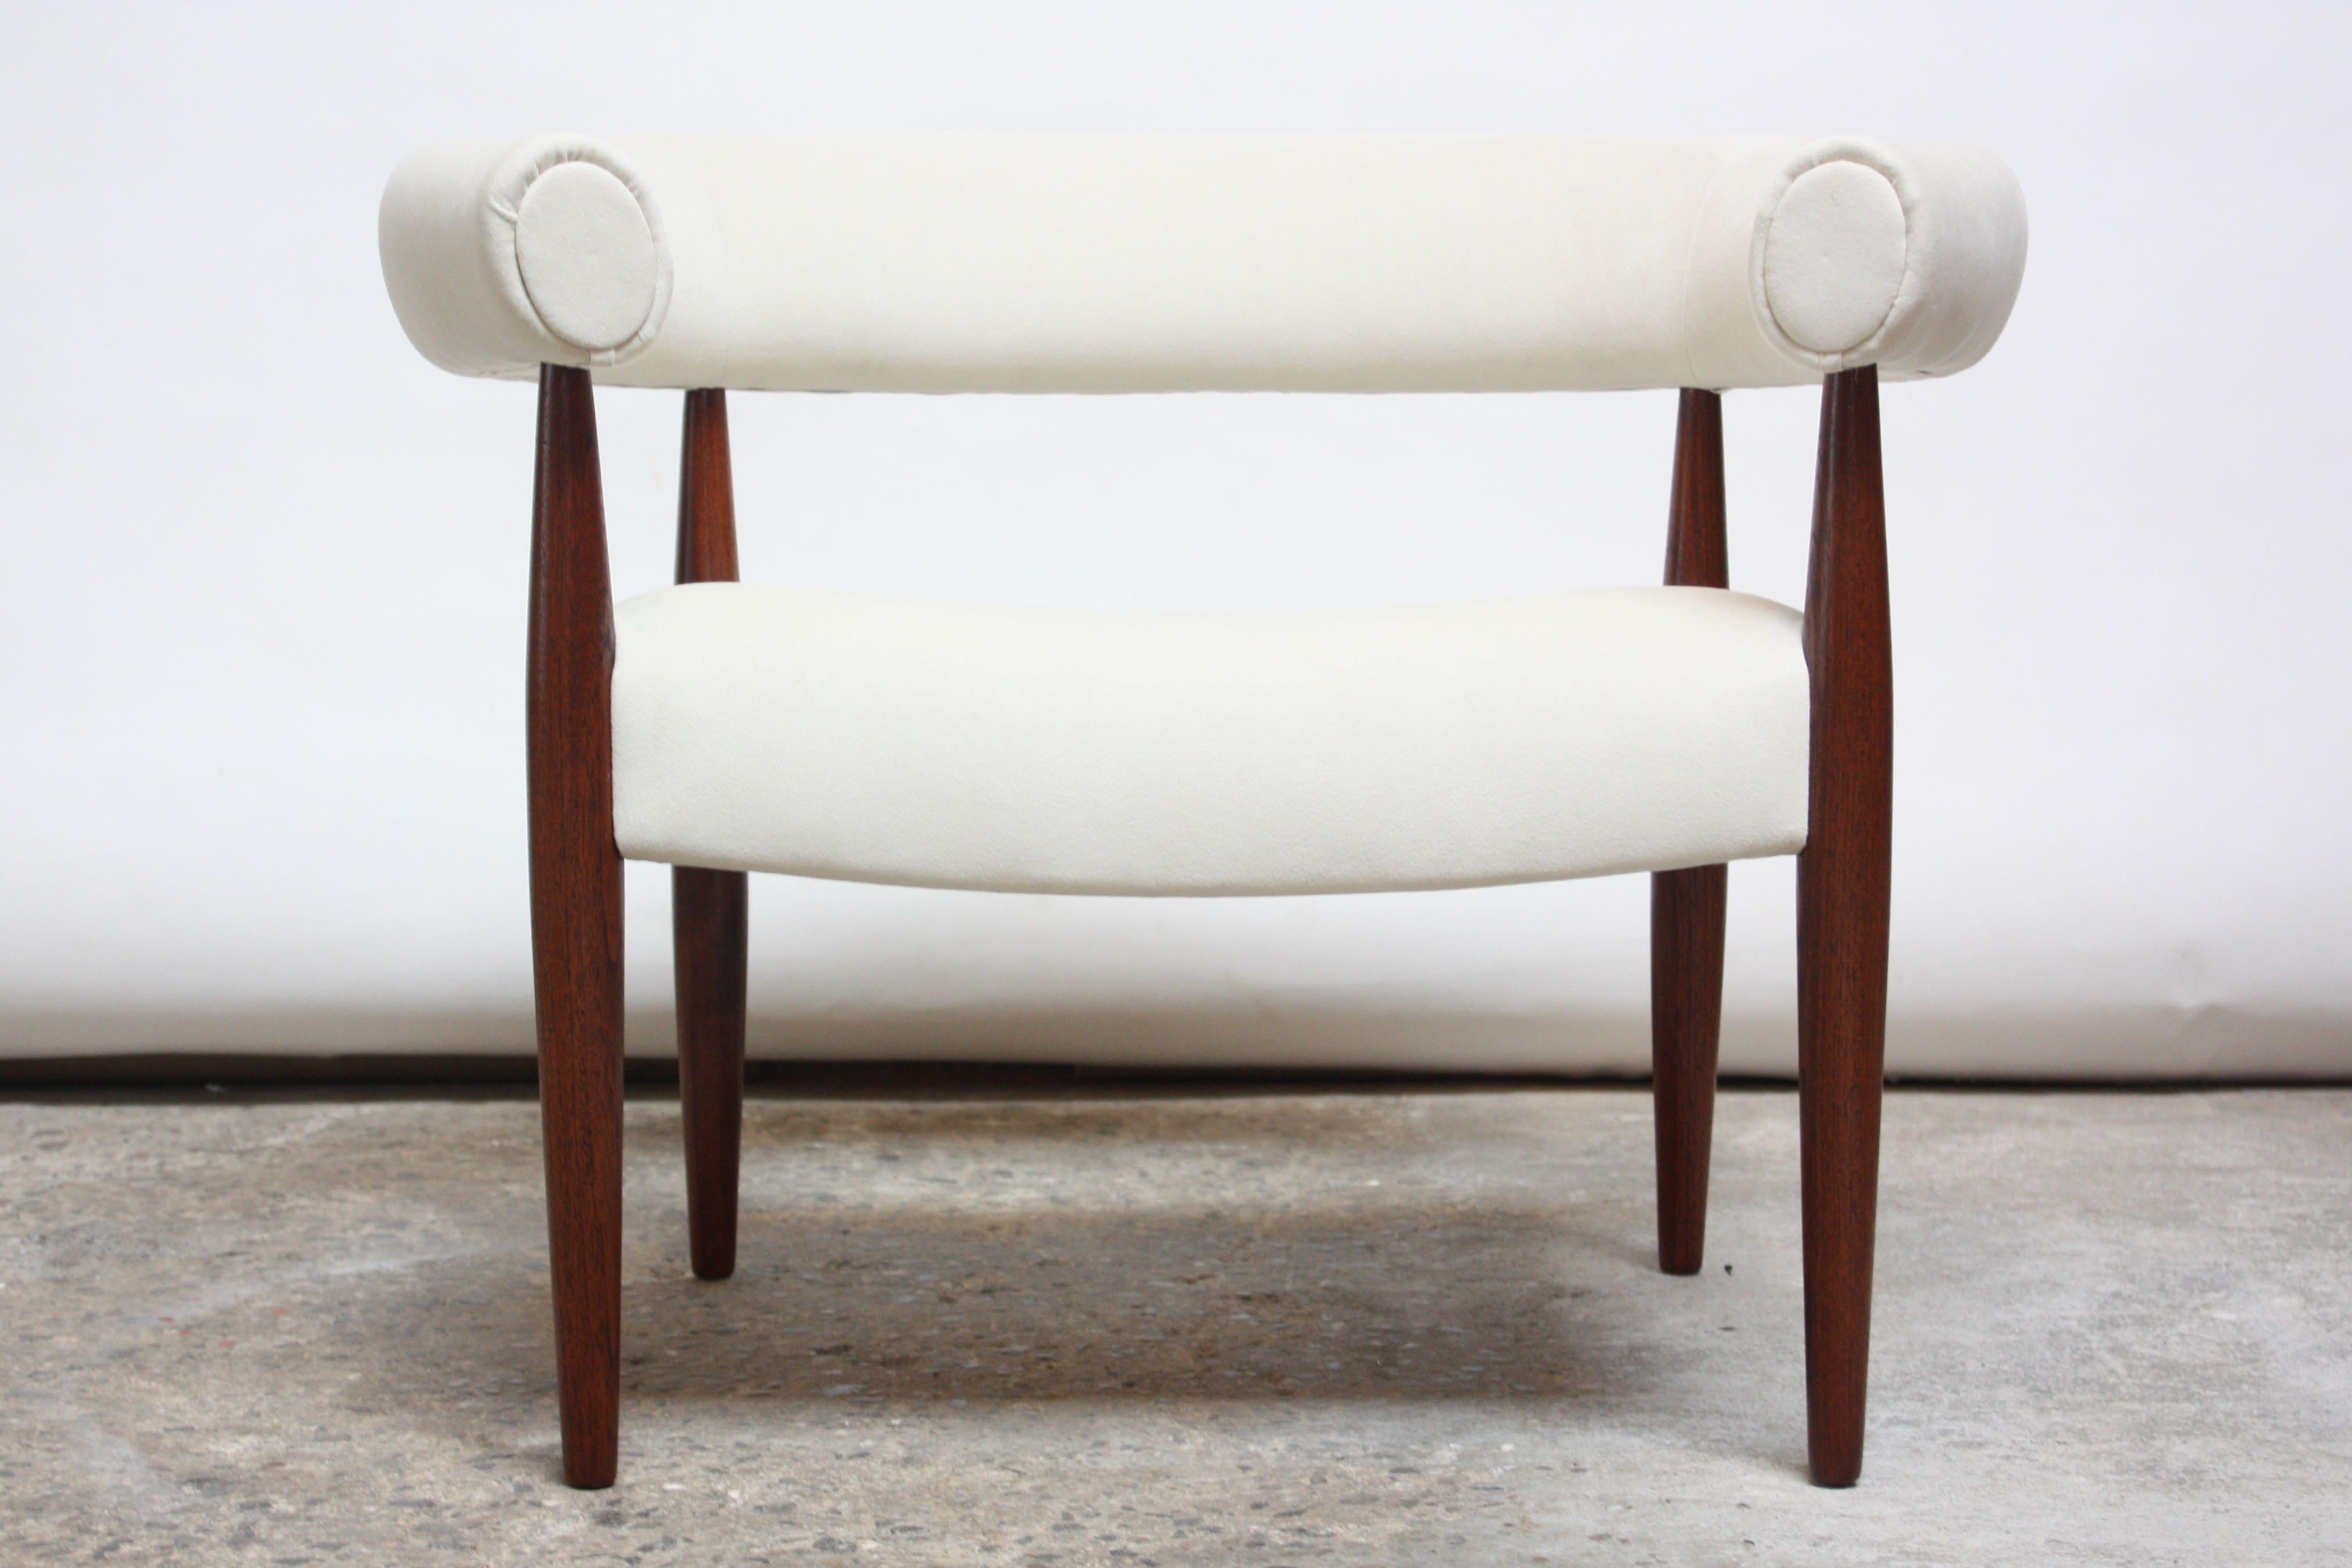 Original Danish 'Ring Chair' often referred to as the 'Pølse Stol' (Sausage Chair) designed by Nanna and Jørgen Ditzel for Kold Savvaerk in 1958. An early example (model 114) in stained teak recovered in an off-white suede (the foam has additionally